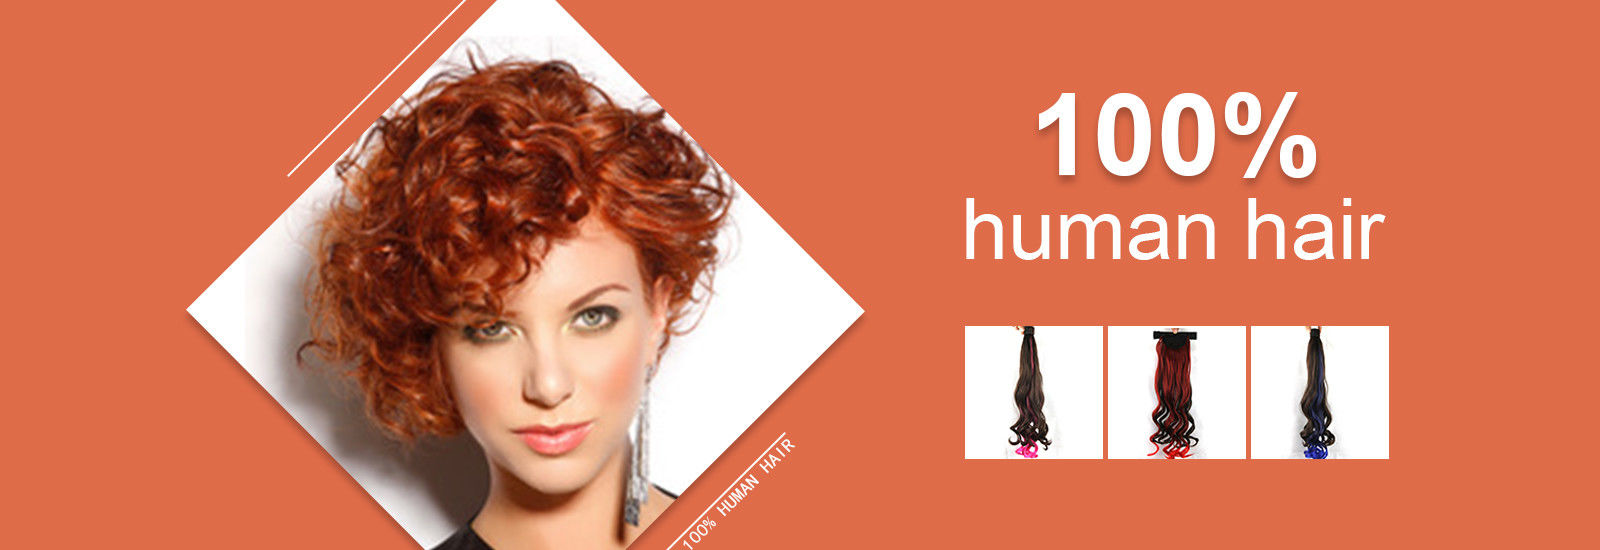 Experience A Multi-Color Silky Wig With A Weight Of 100g And A Length Of 50cm